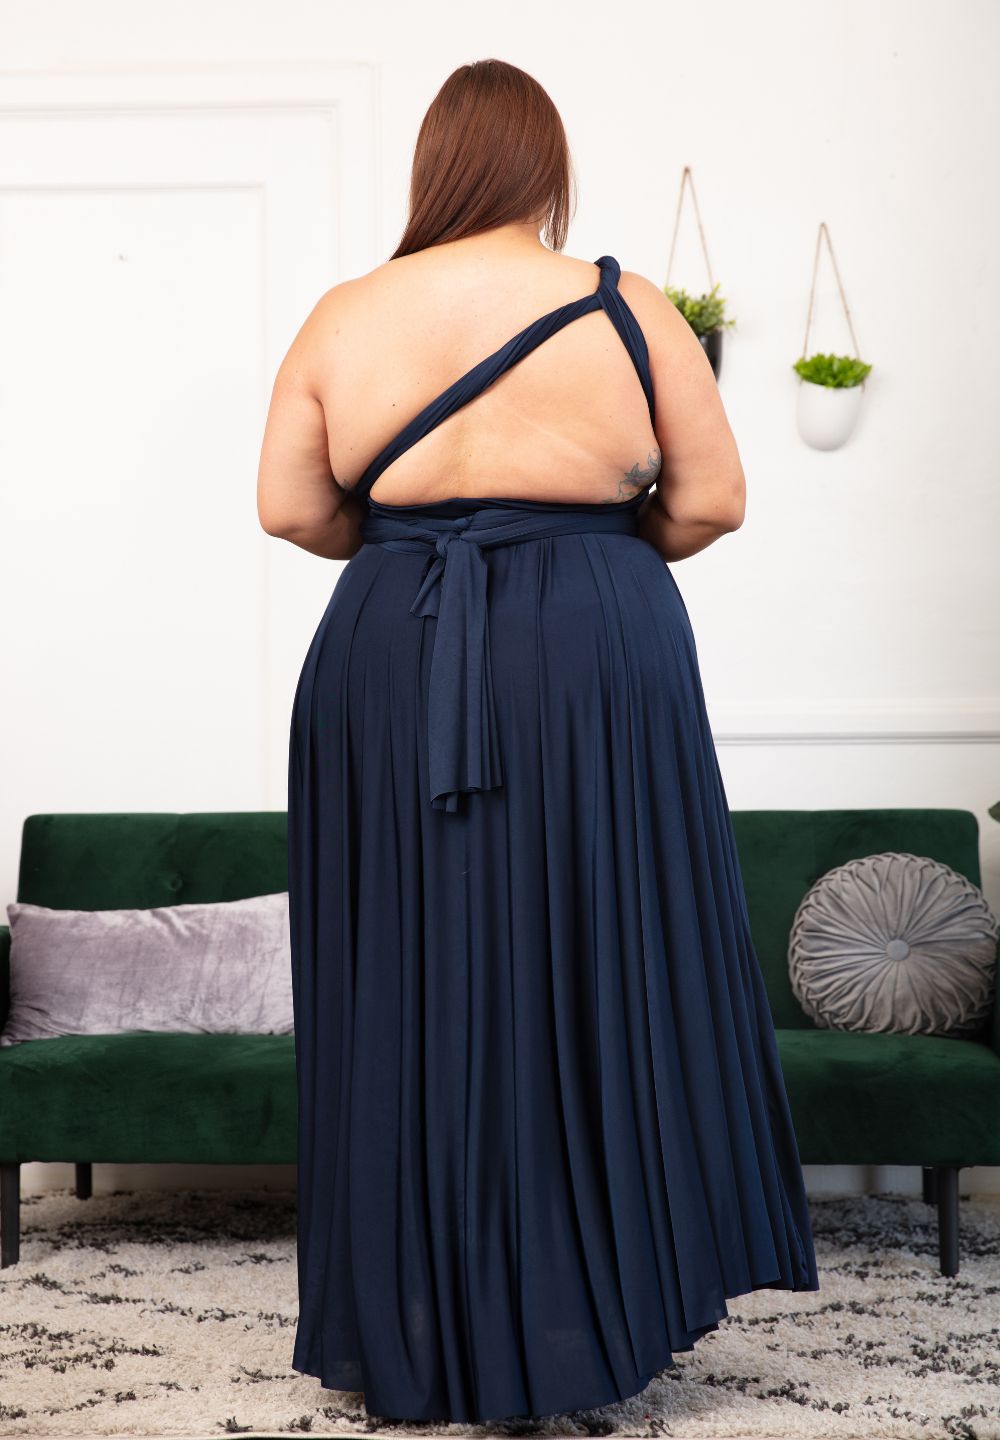 Plus Size Must Have: Eternity Convertible Dress by SWAK Designs 